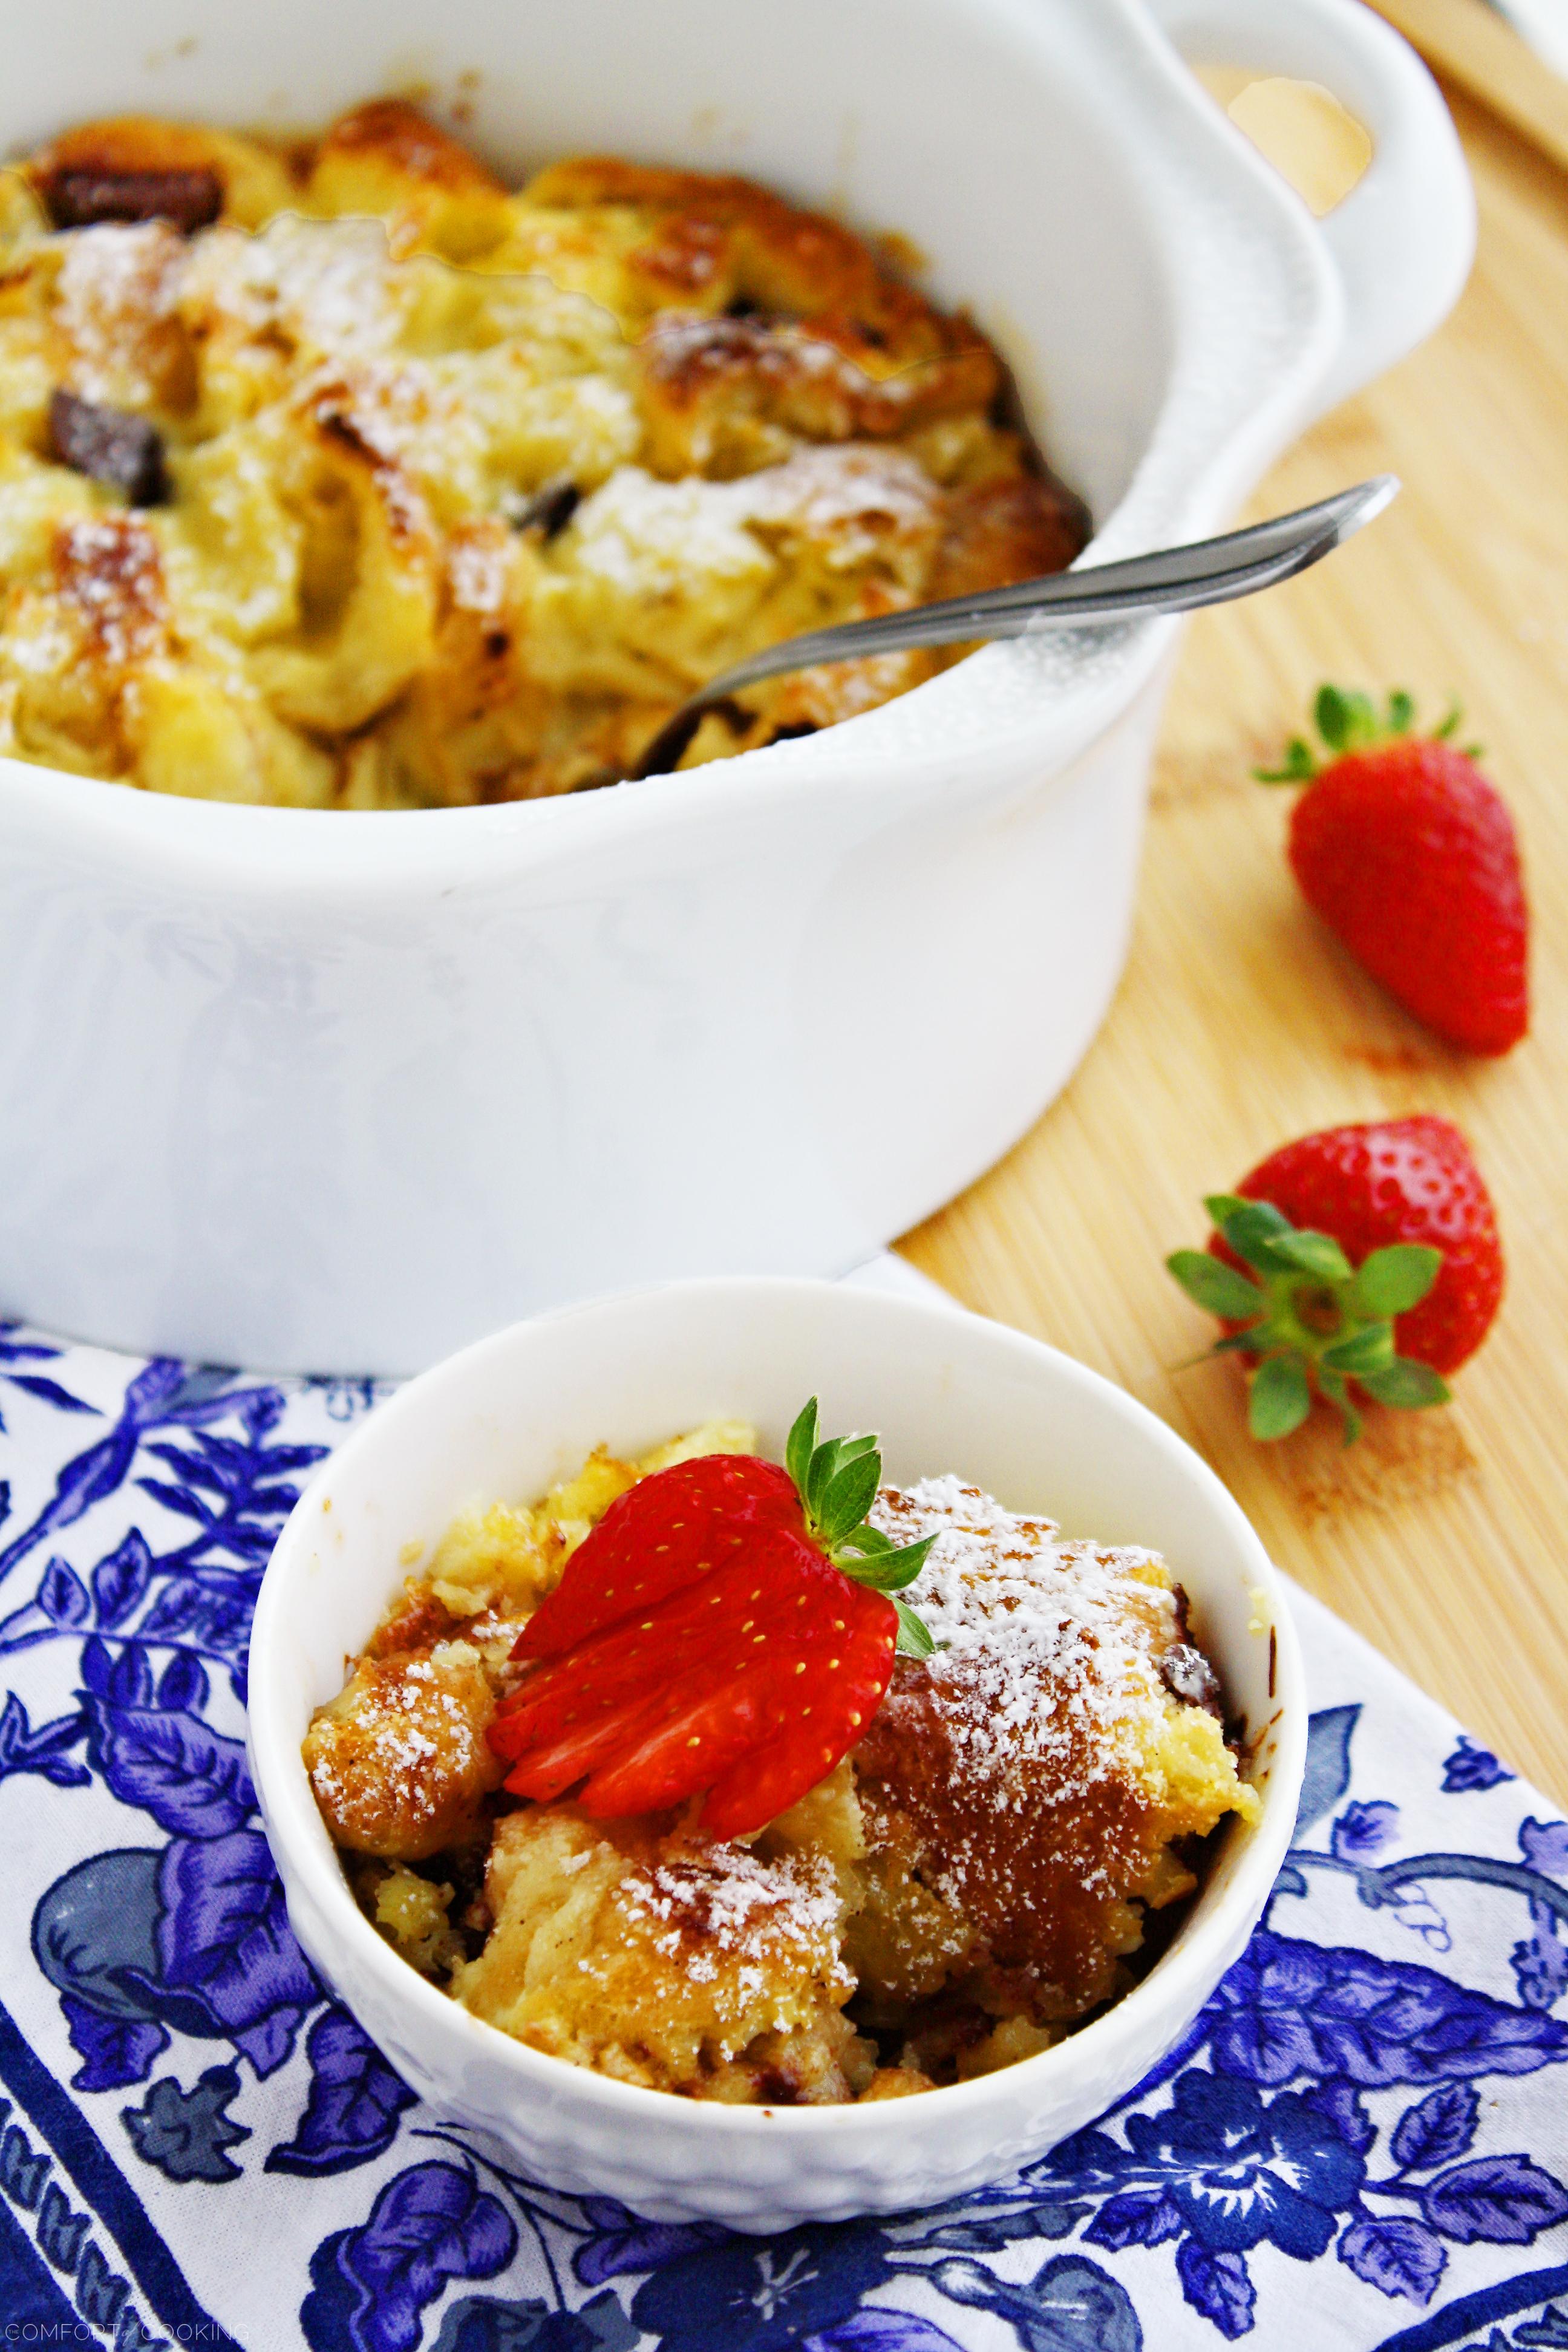 Croissant and Chocolate Bread Pudding – The Comfort of Cooking